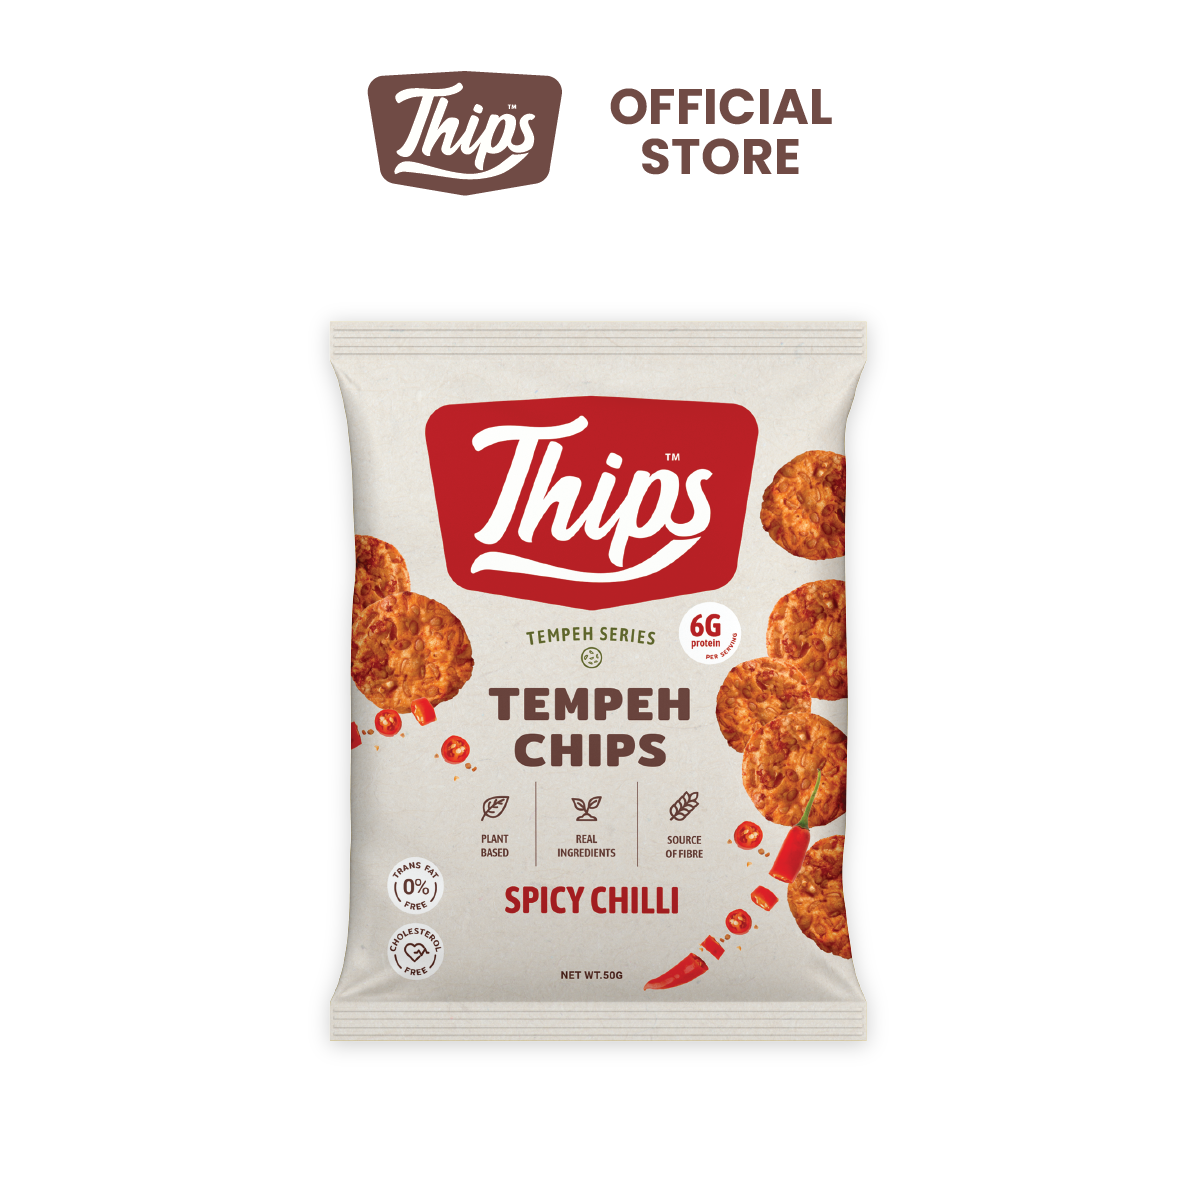 Thips Spicy Chilli Tempeh Chips (1 x 50g)